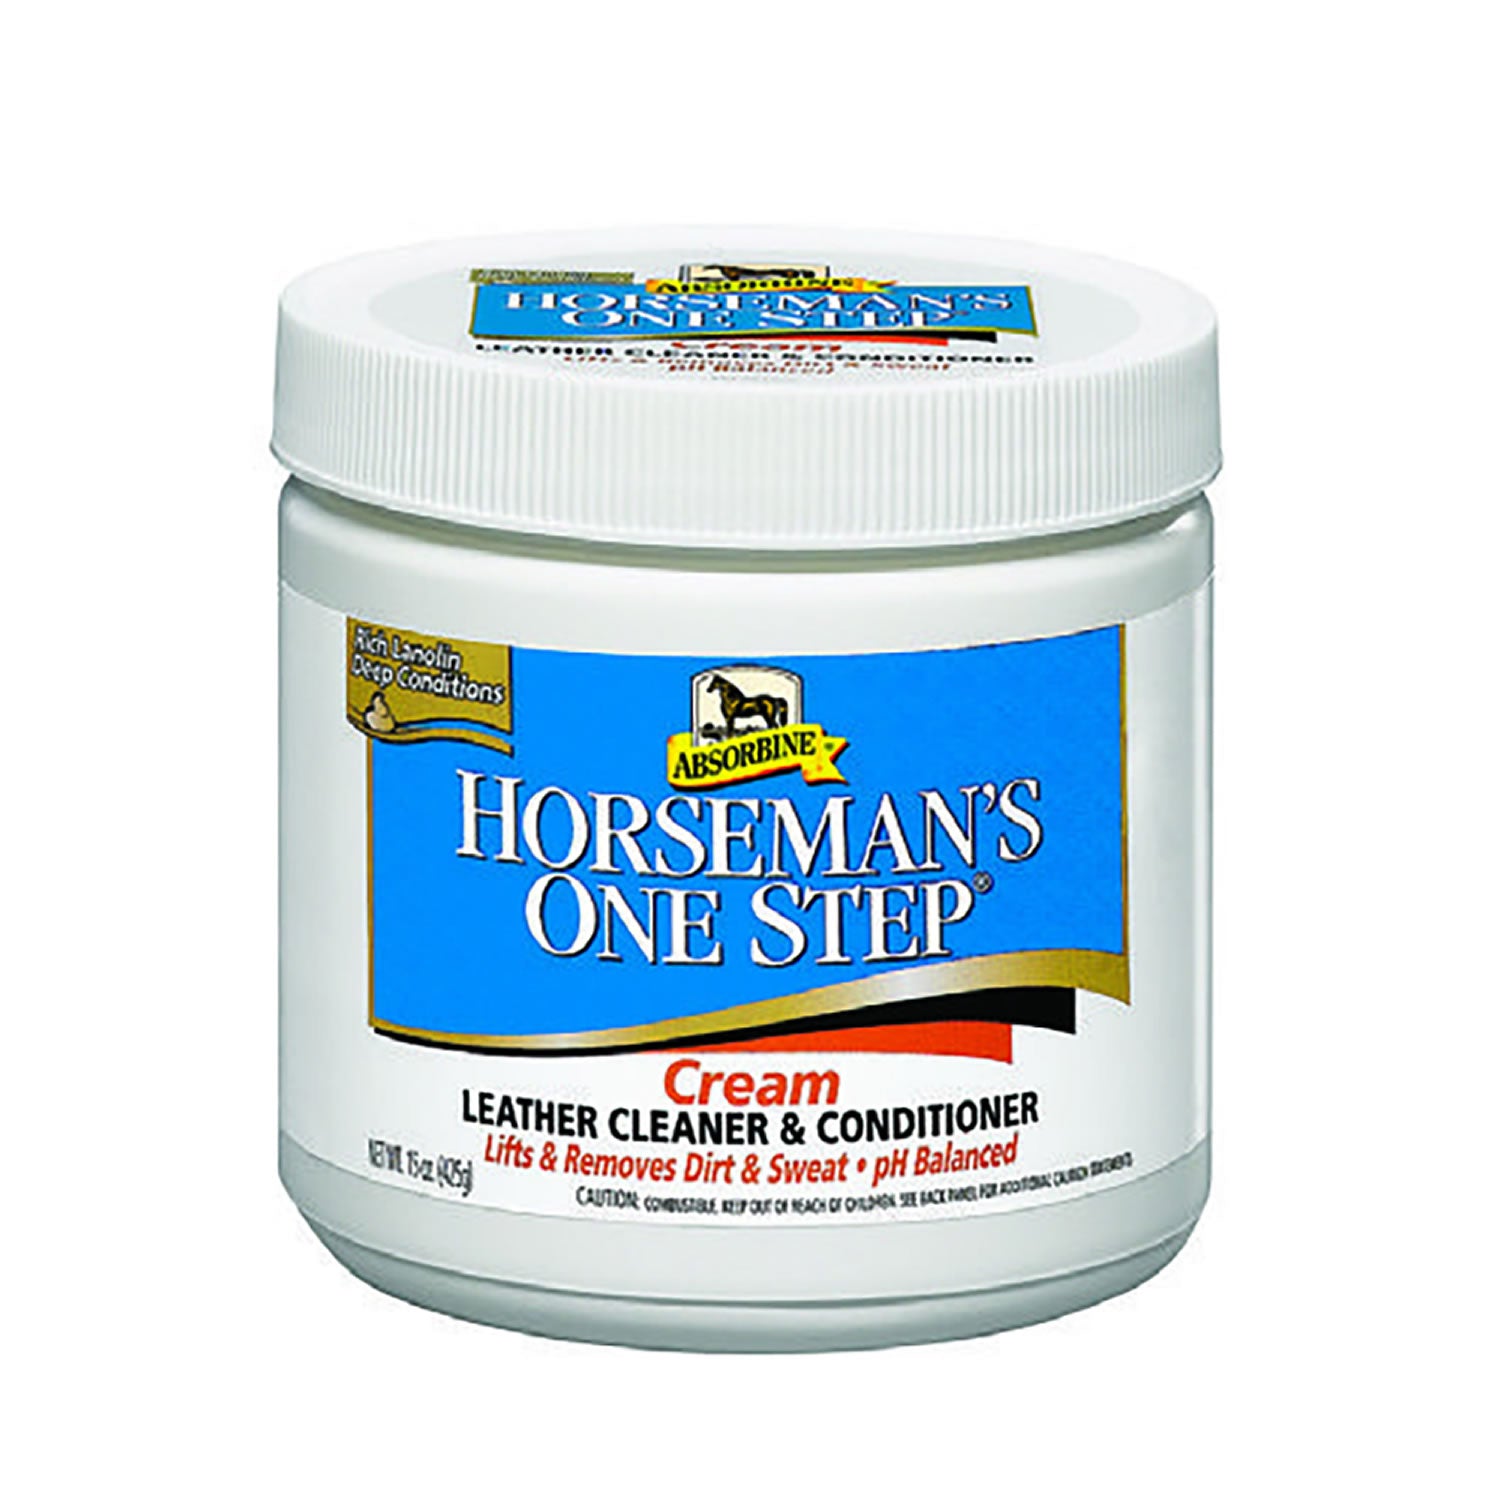 Absorbine Horseman's One Step Harness Cleaner 425g